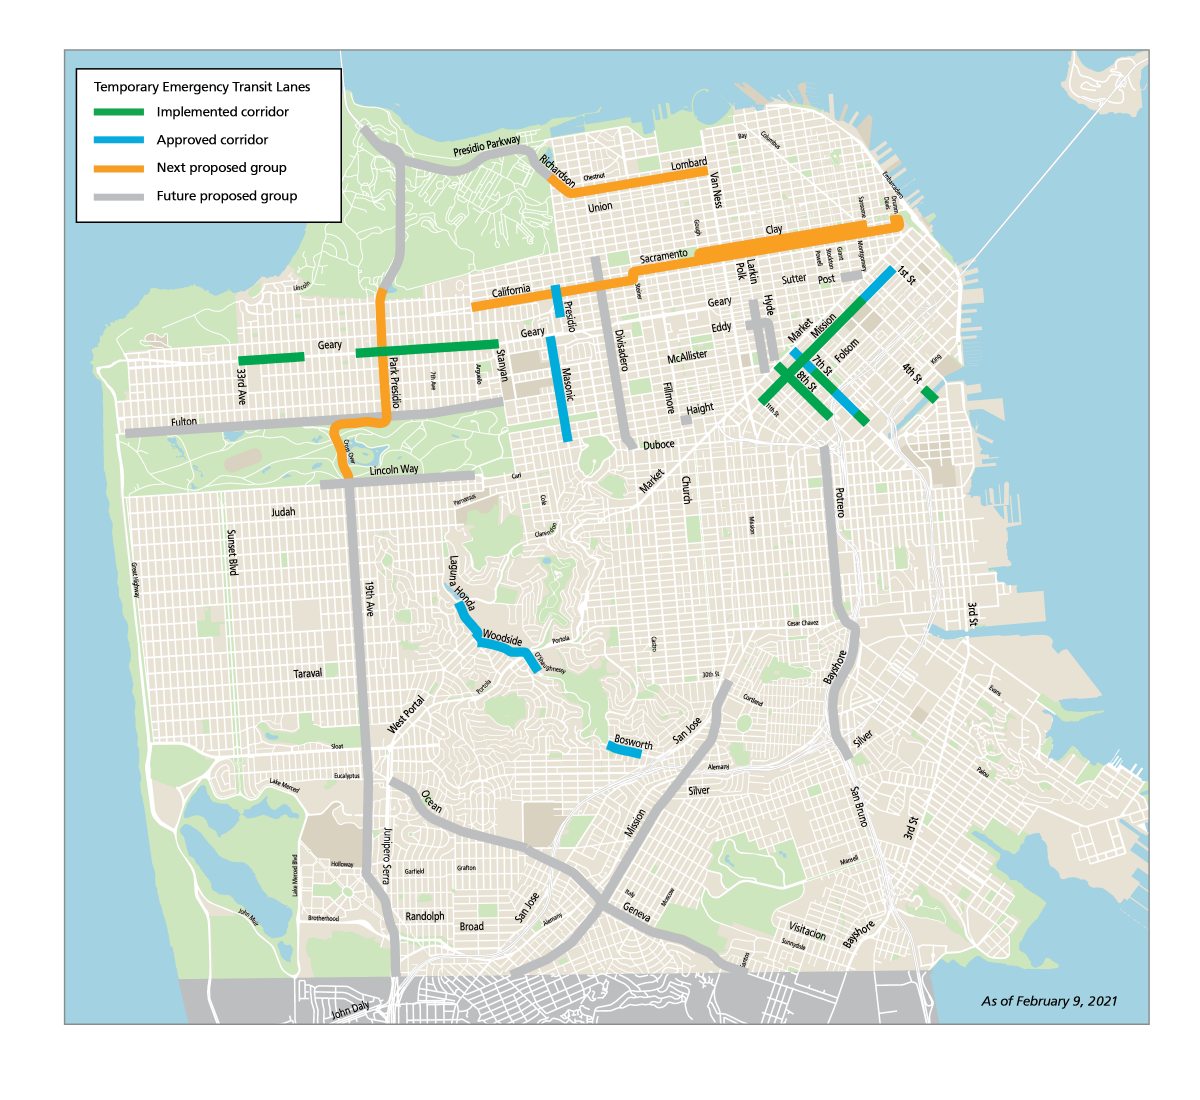 map showing corridors of proposed and implemented temporary emergency transit lanes 